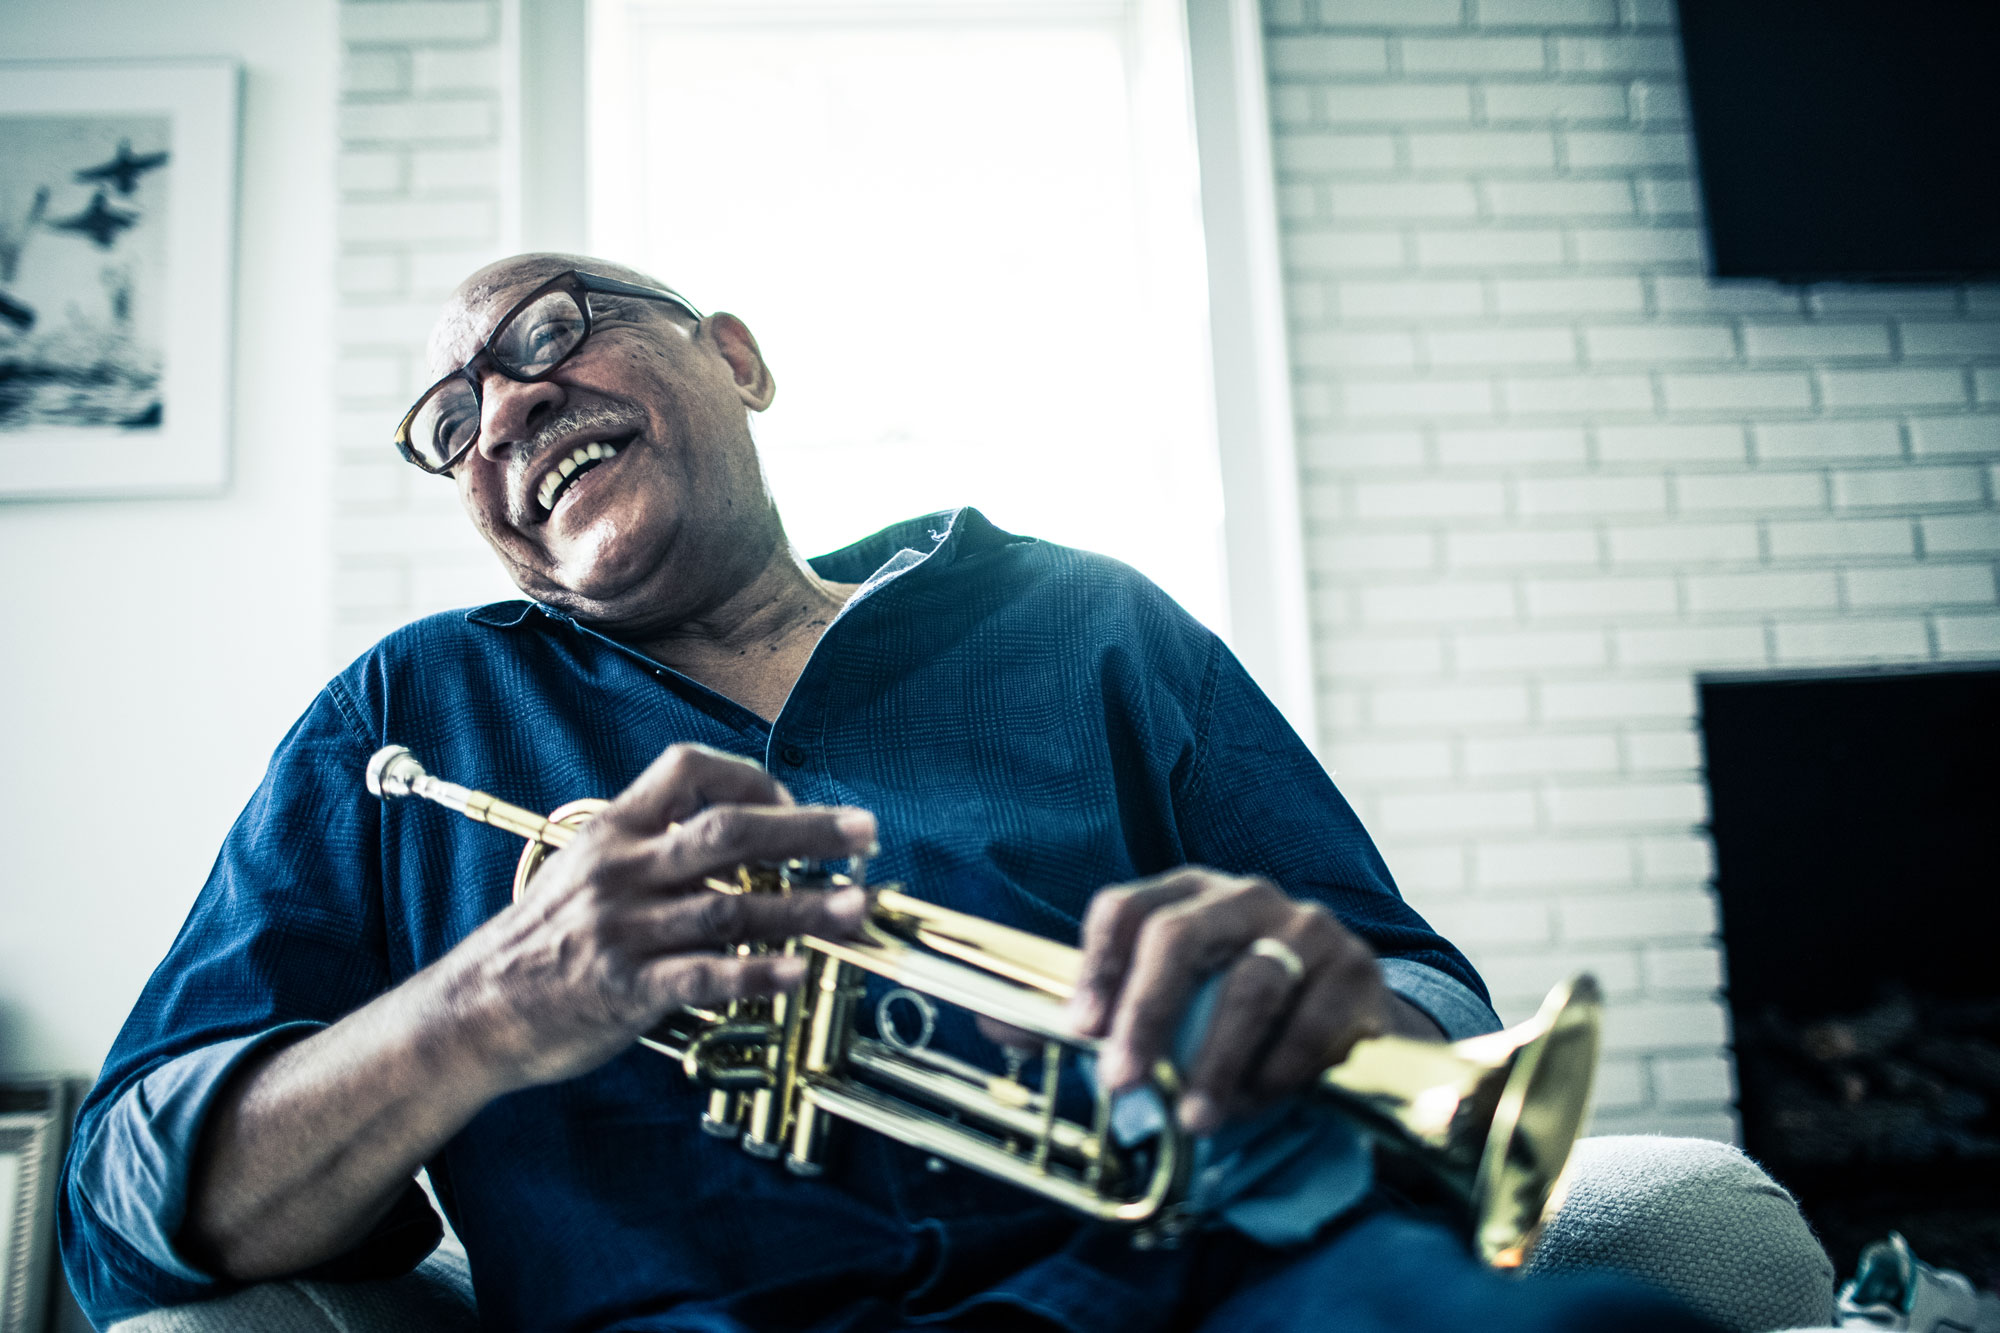 An older man sits on a chair, his head tilted back in laughter, a trumpet in his hands